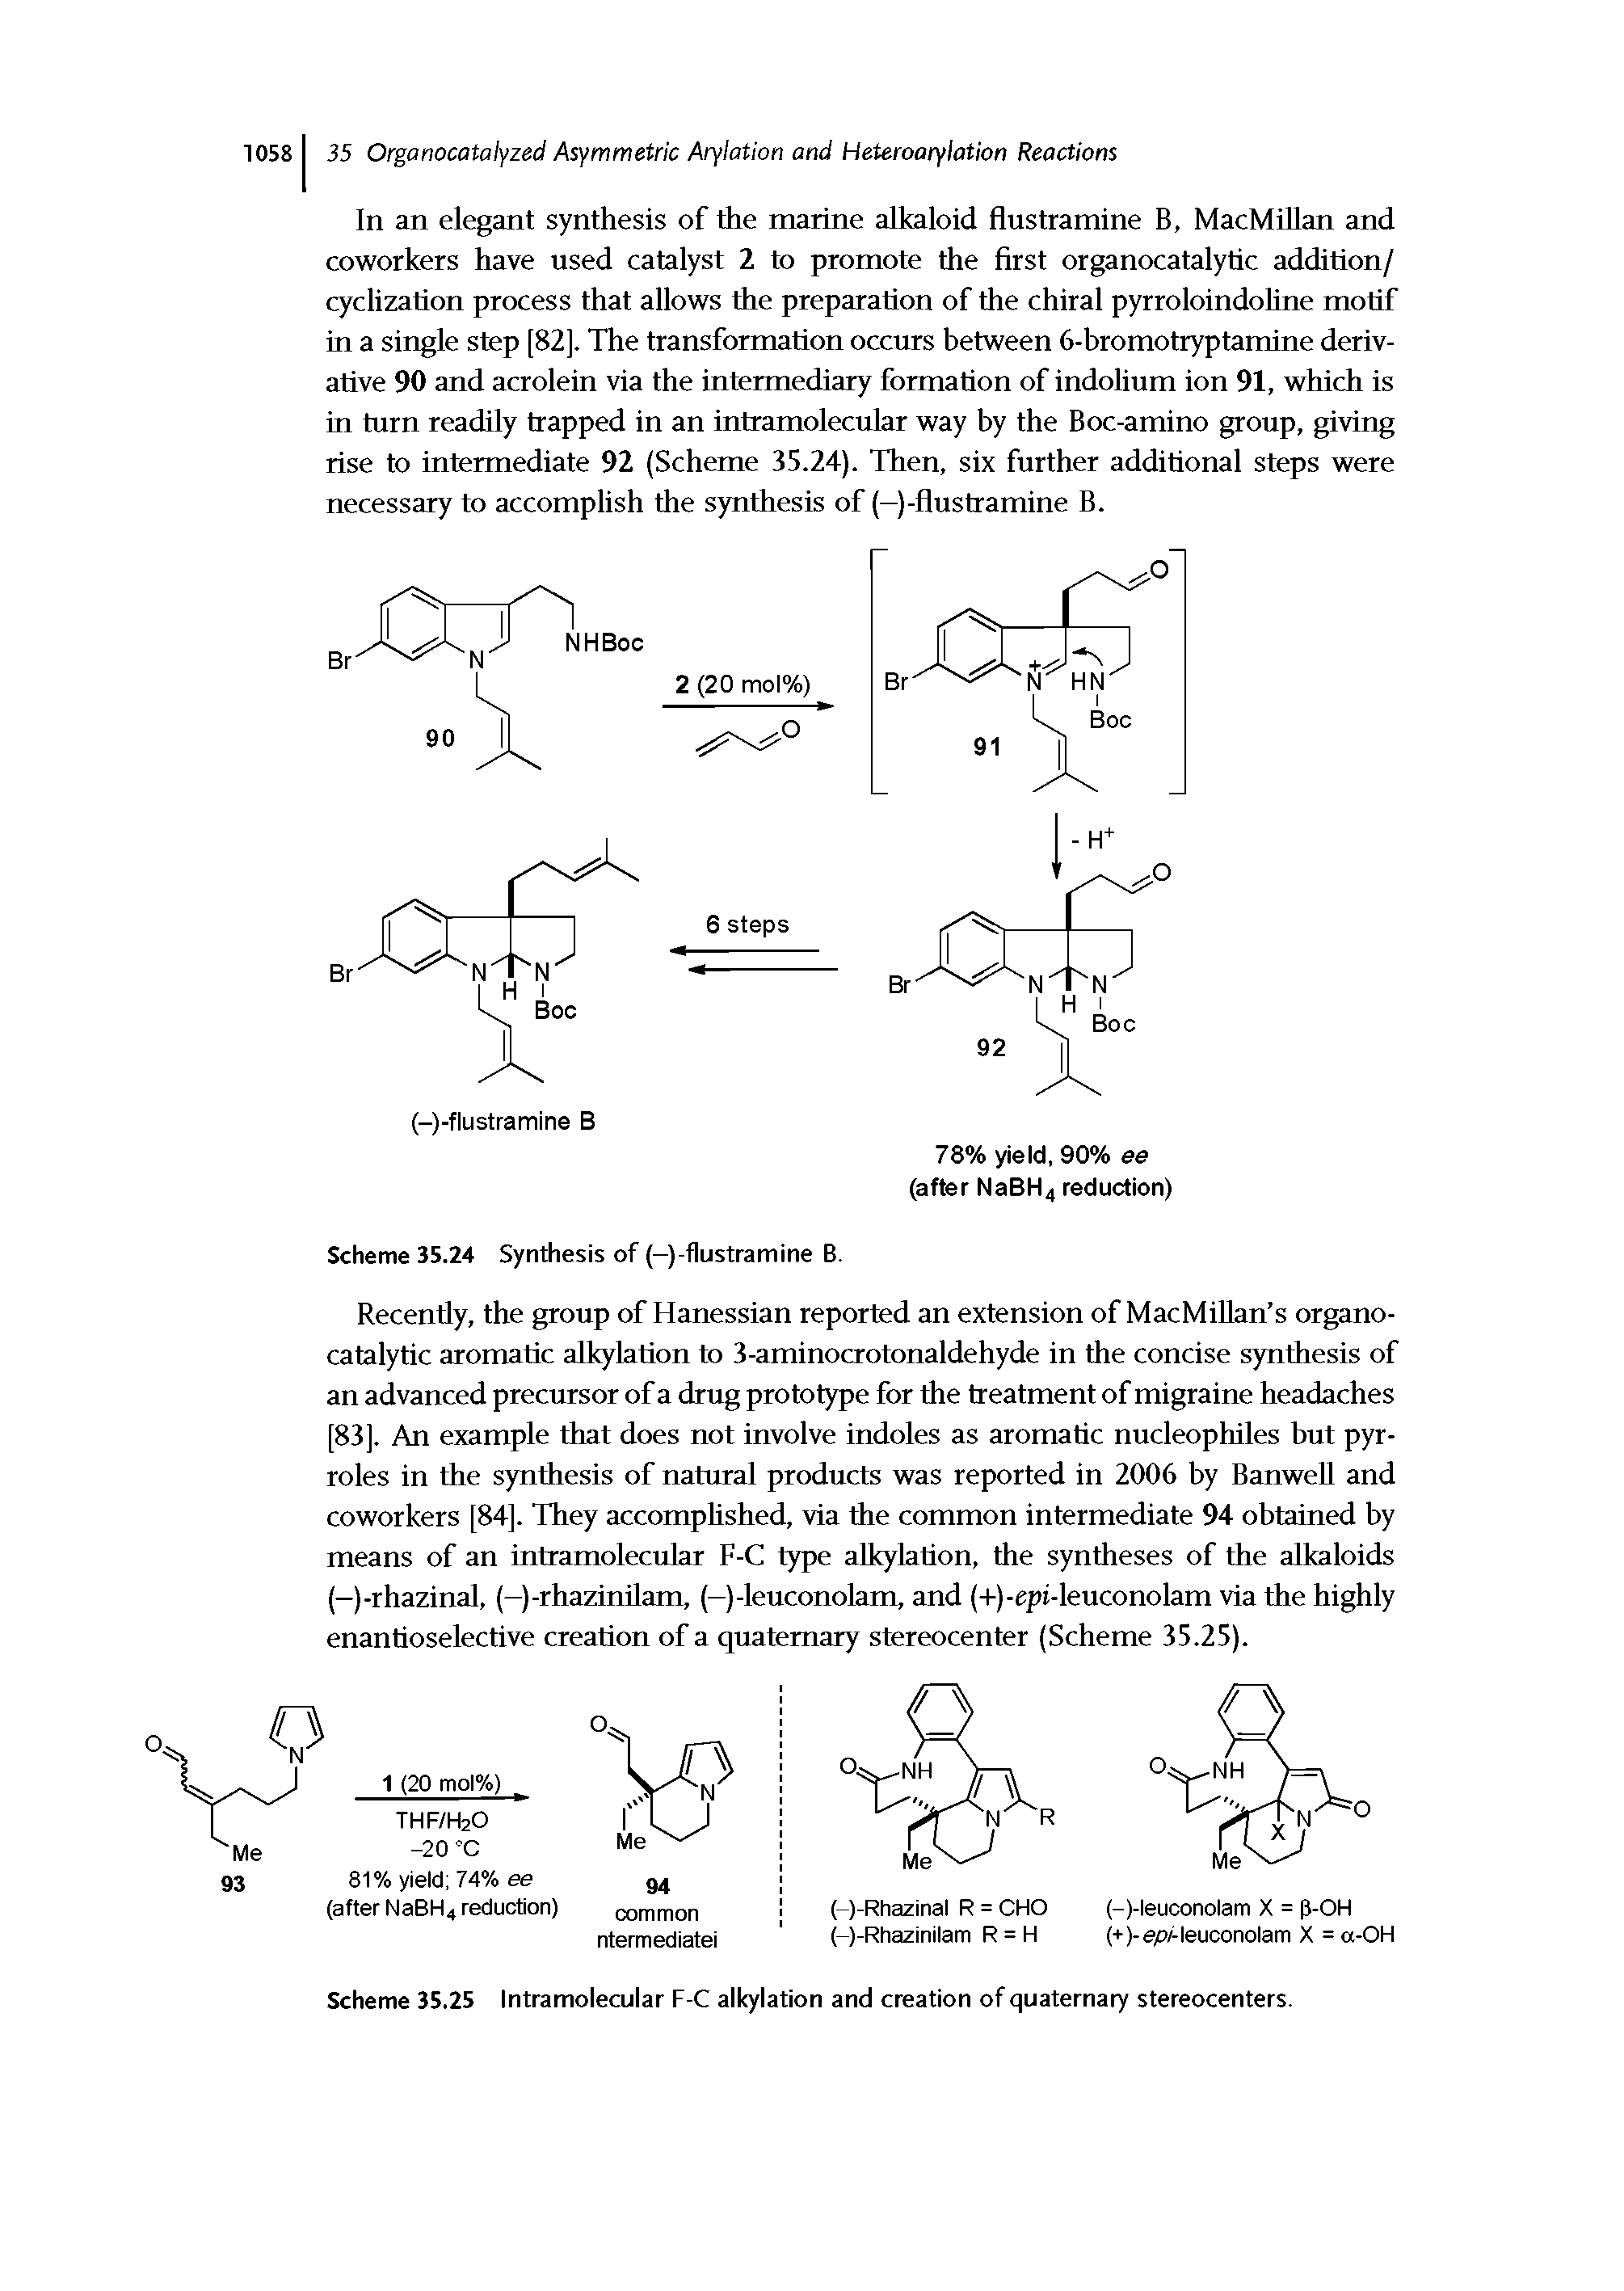 Scheme 35.25 Intramolecular F-C alkylation and creation of quaternary stereocenters.